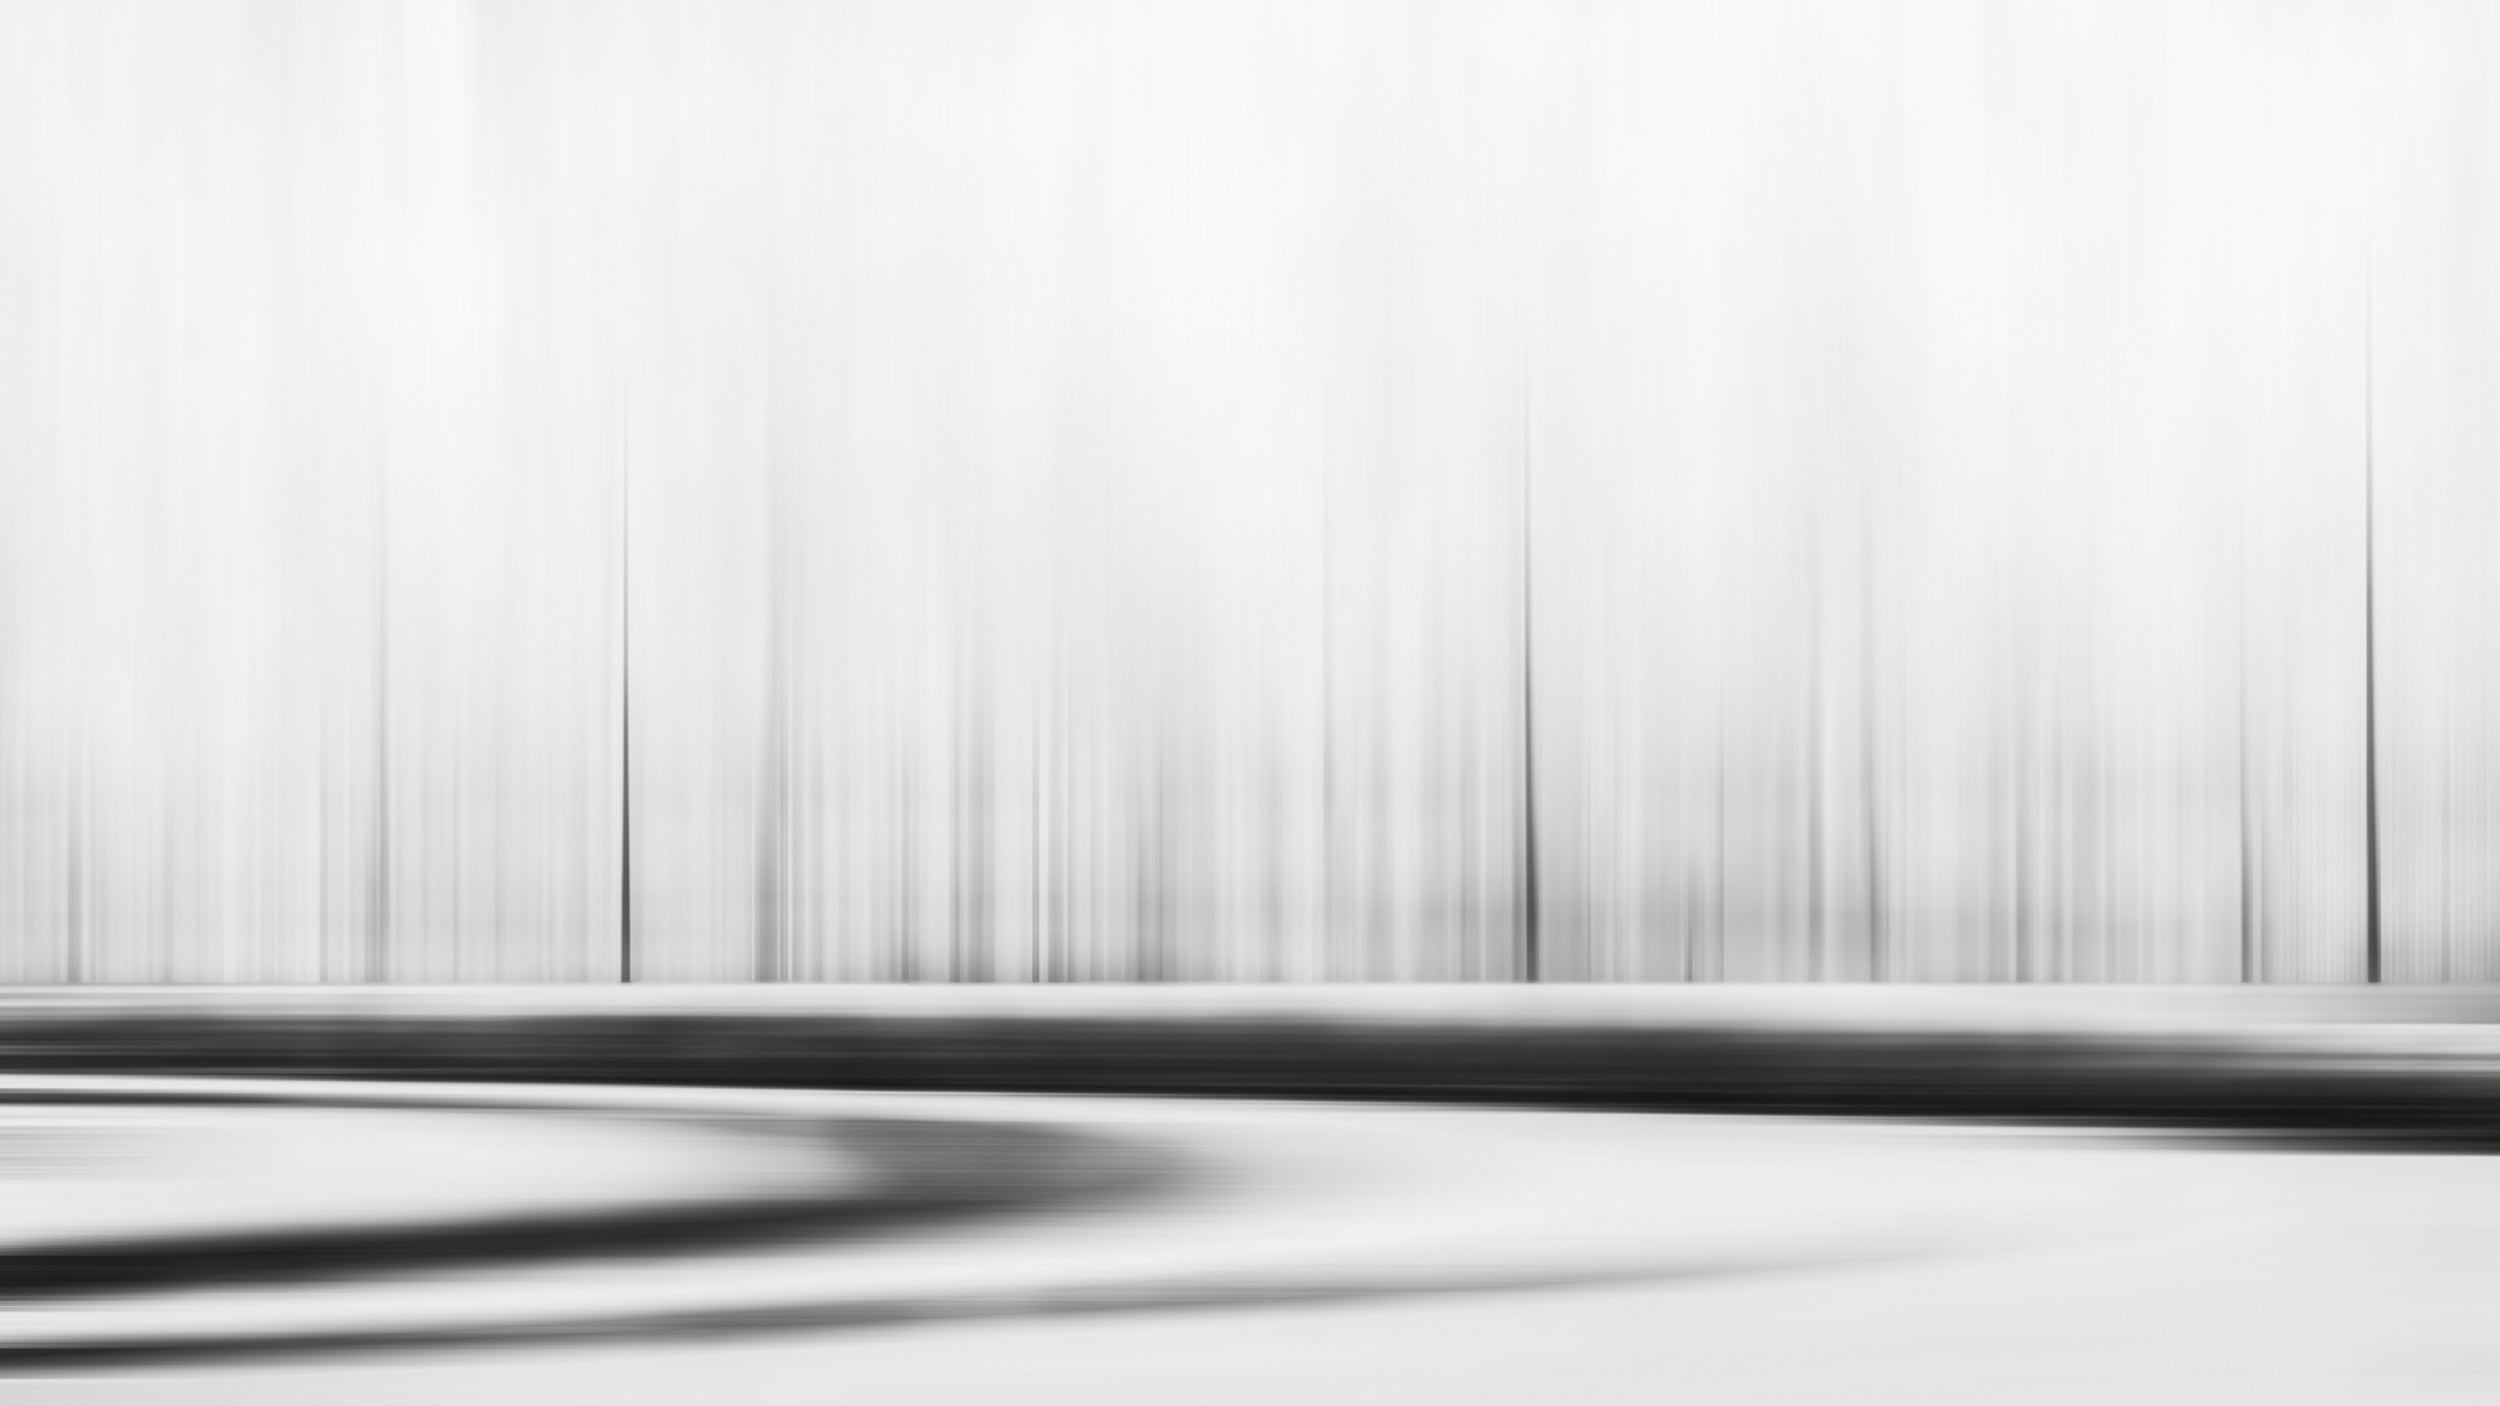 "Minimalist black and white photo of a roundabout, symbolizing the endless passage of time."